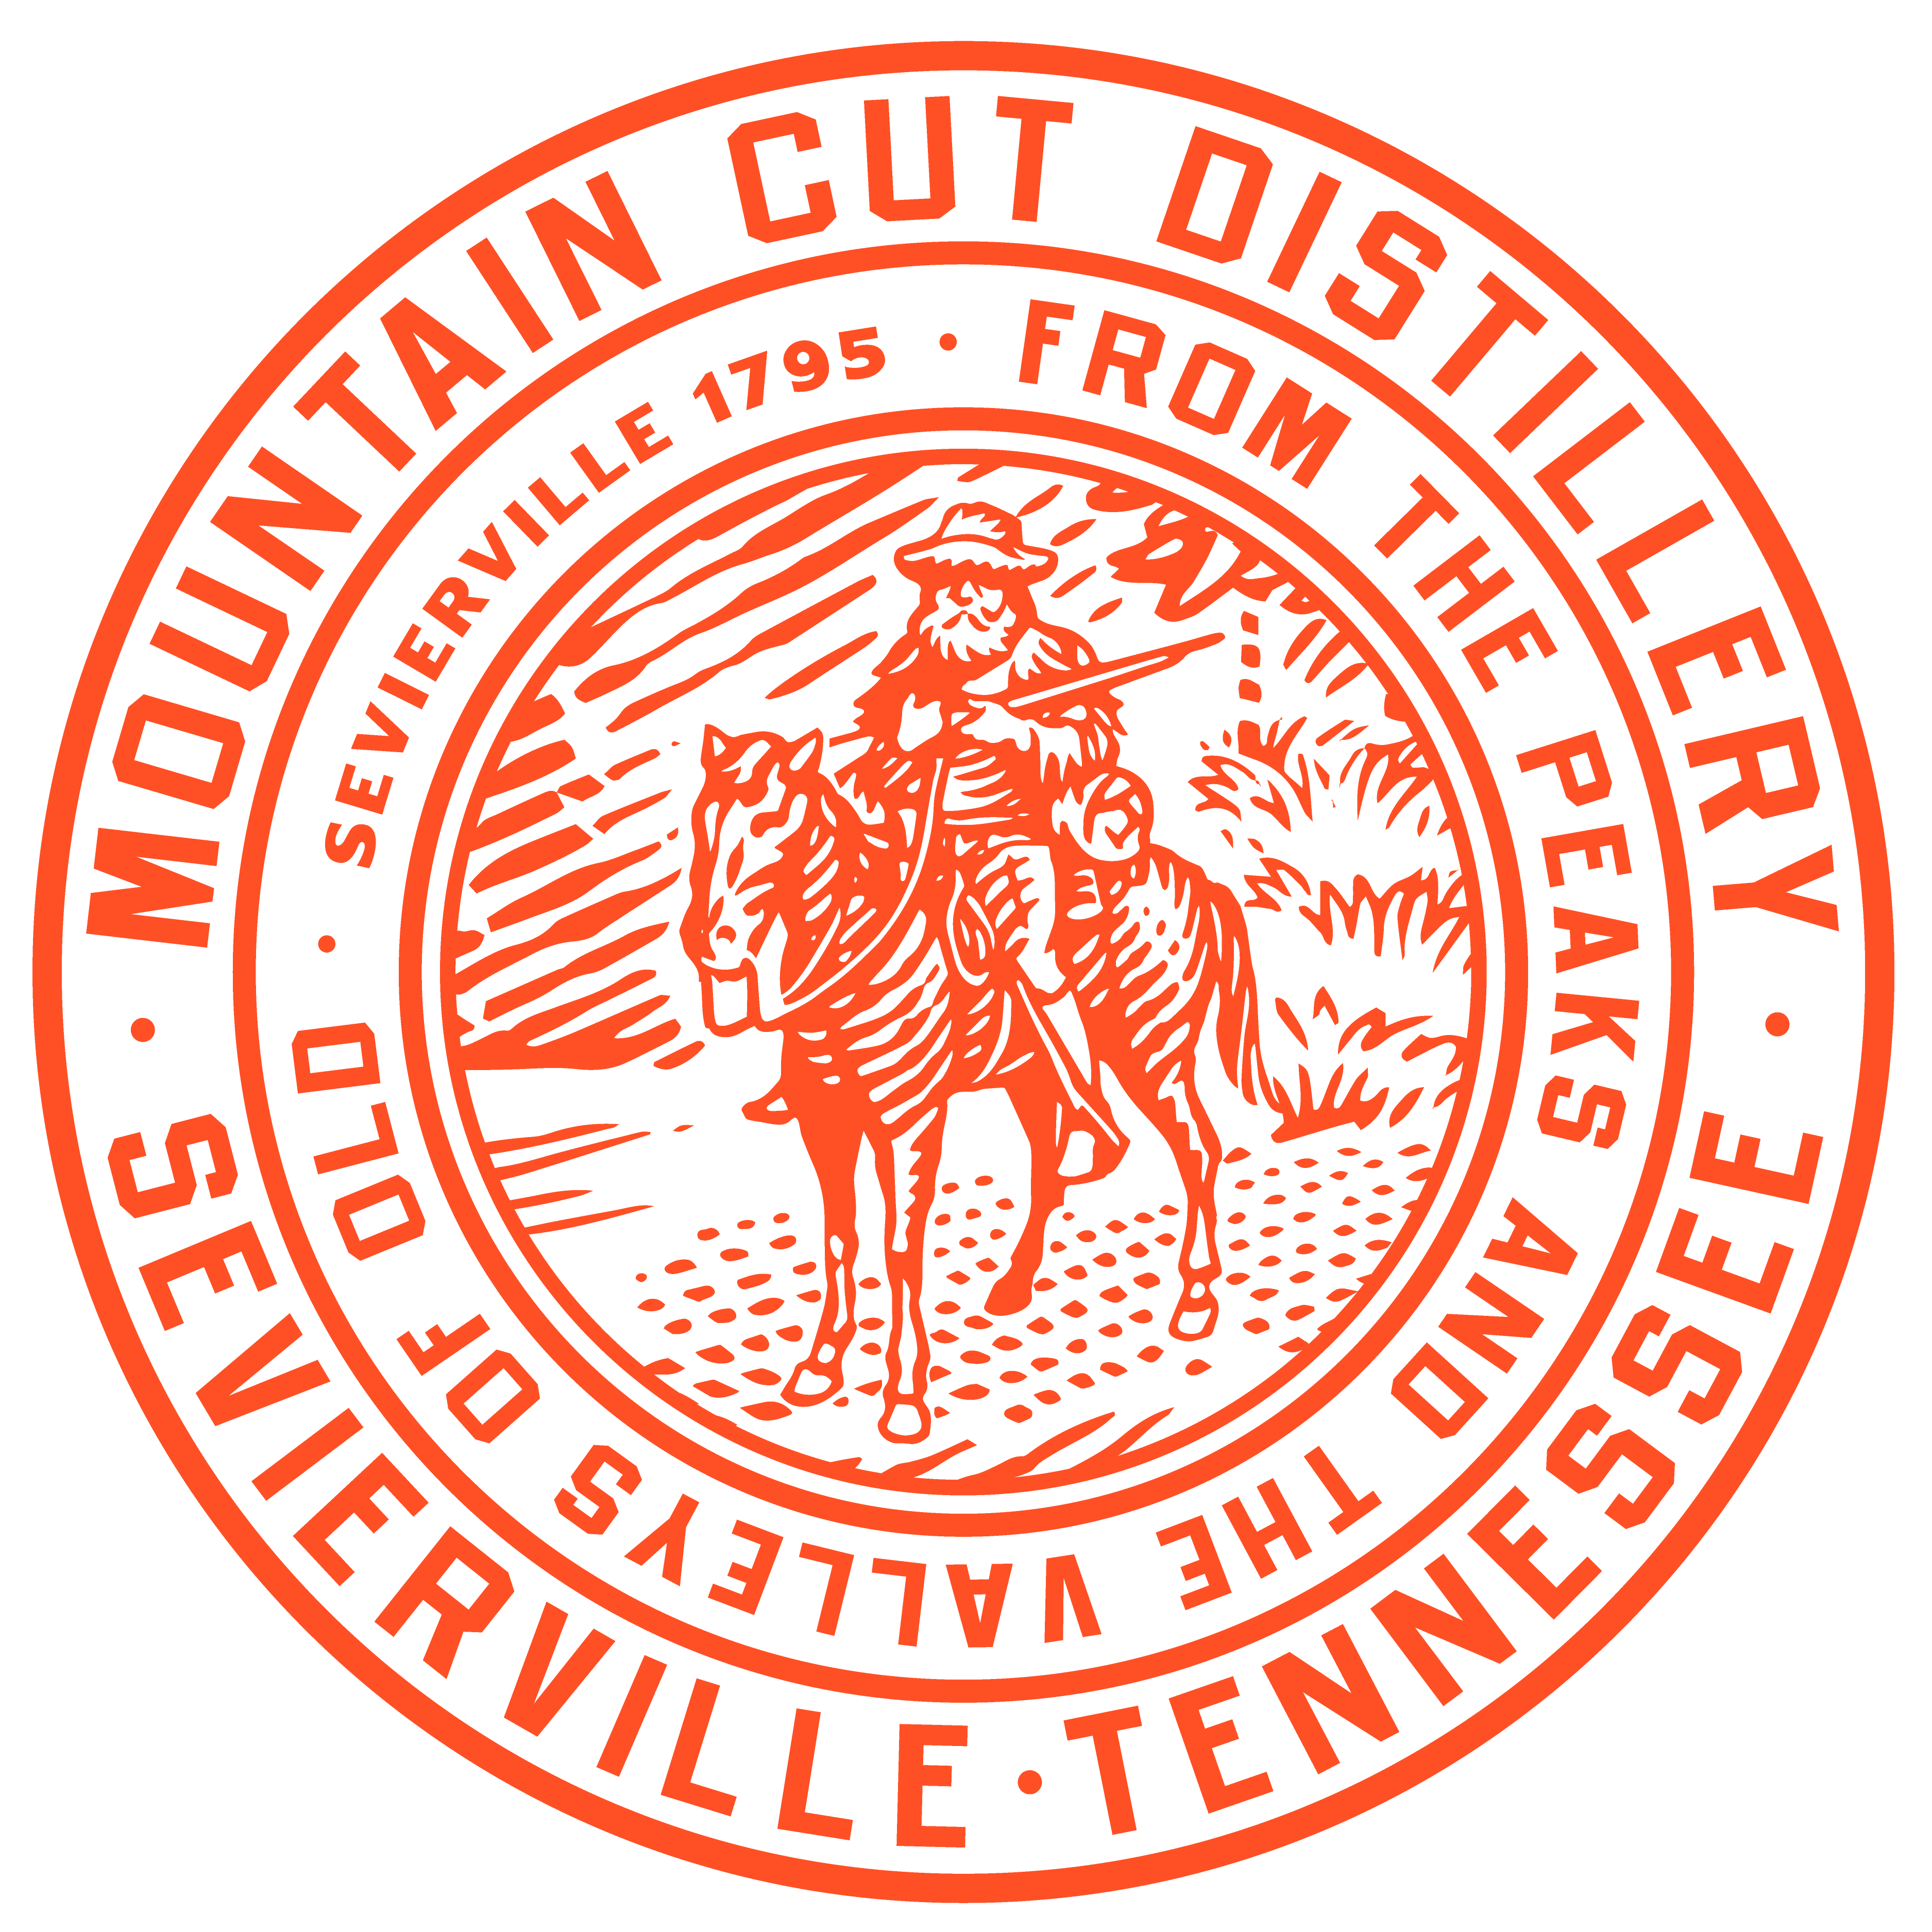 Mountain Cut Distillery logo design by logo designer Chad Michael Studio for your inspiration and for the worlds largest logo competition